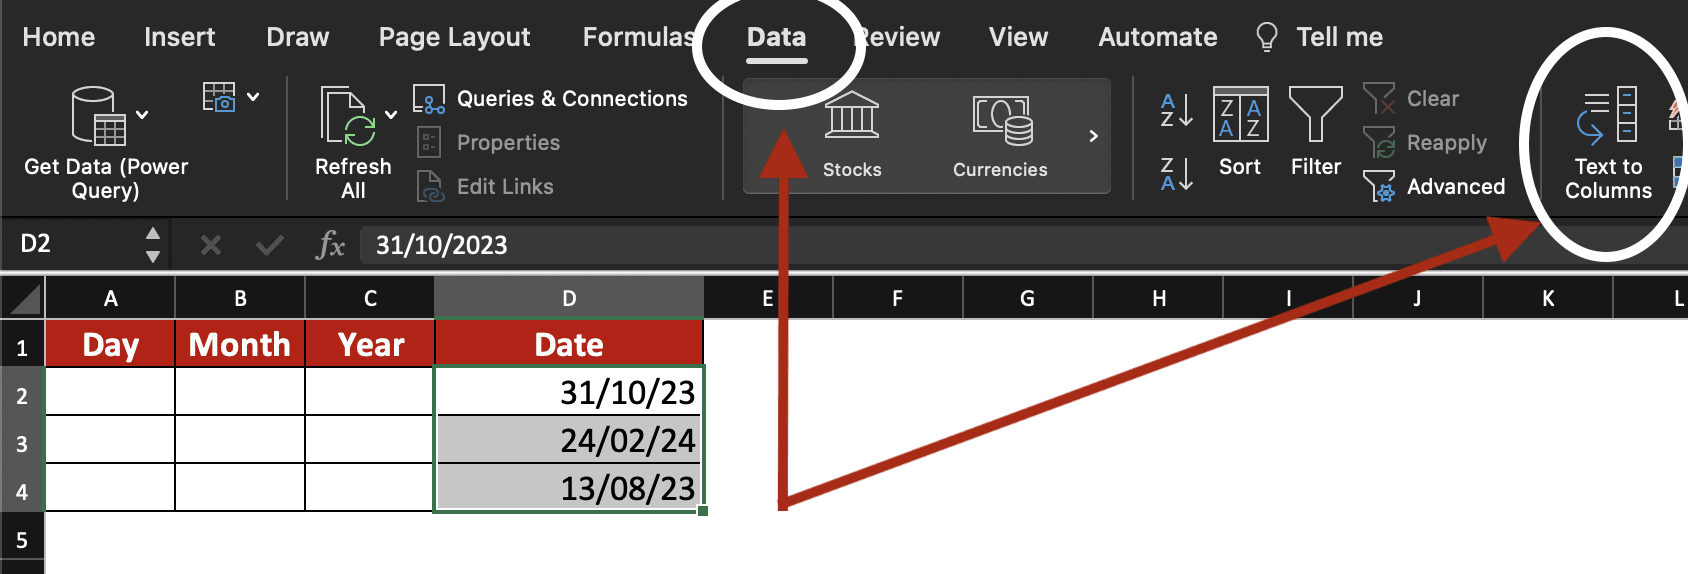 Selection of dates, click on Data then Text to Columns.